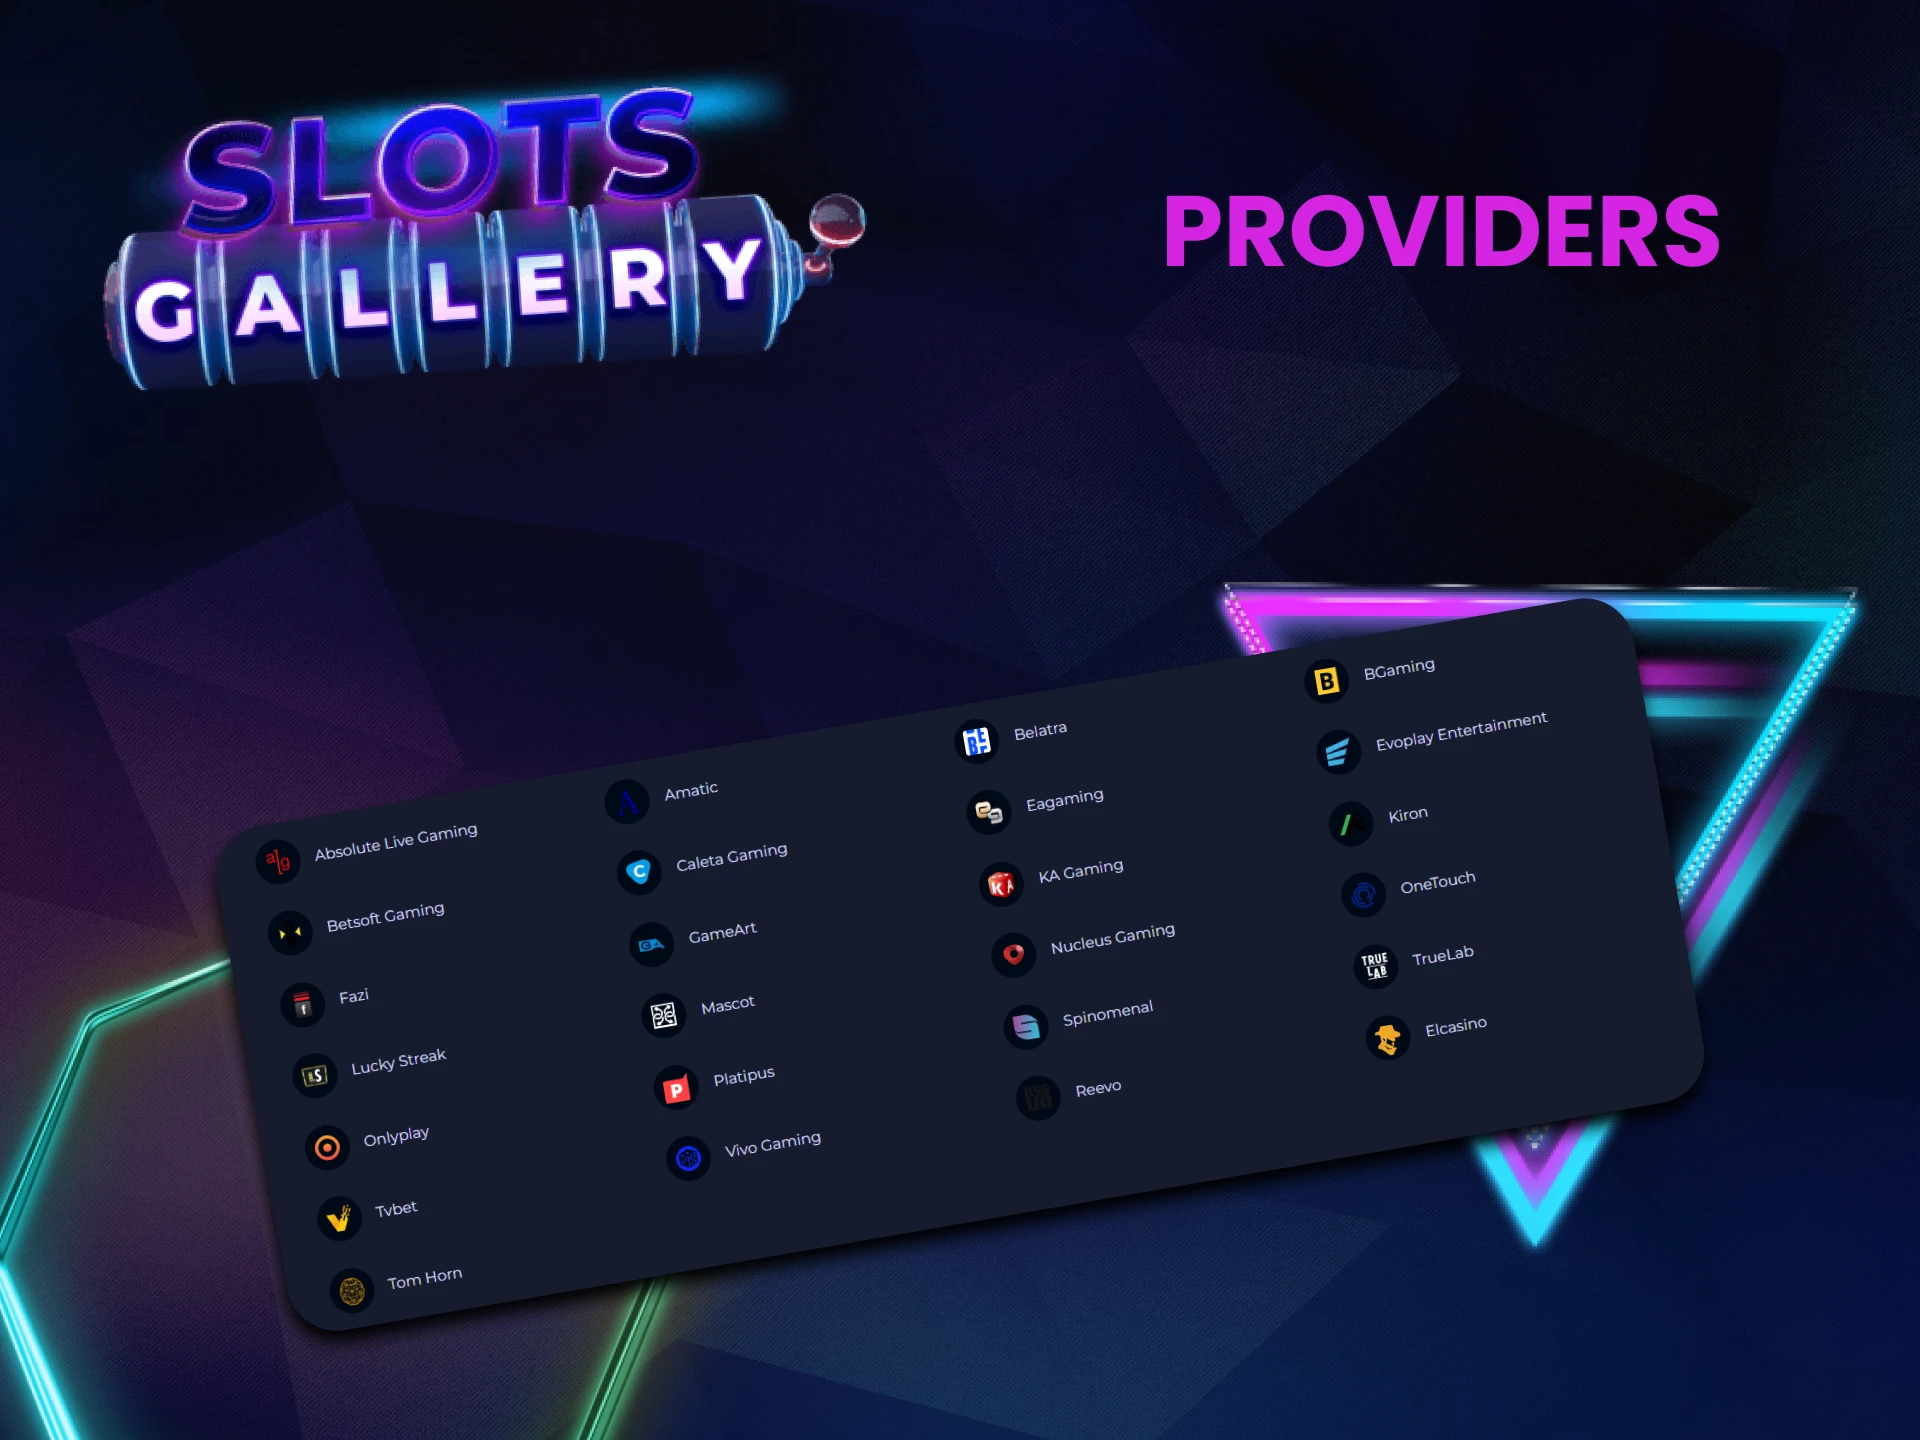 We will highlight table game providers on Slots Gallery.